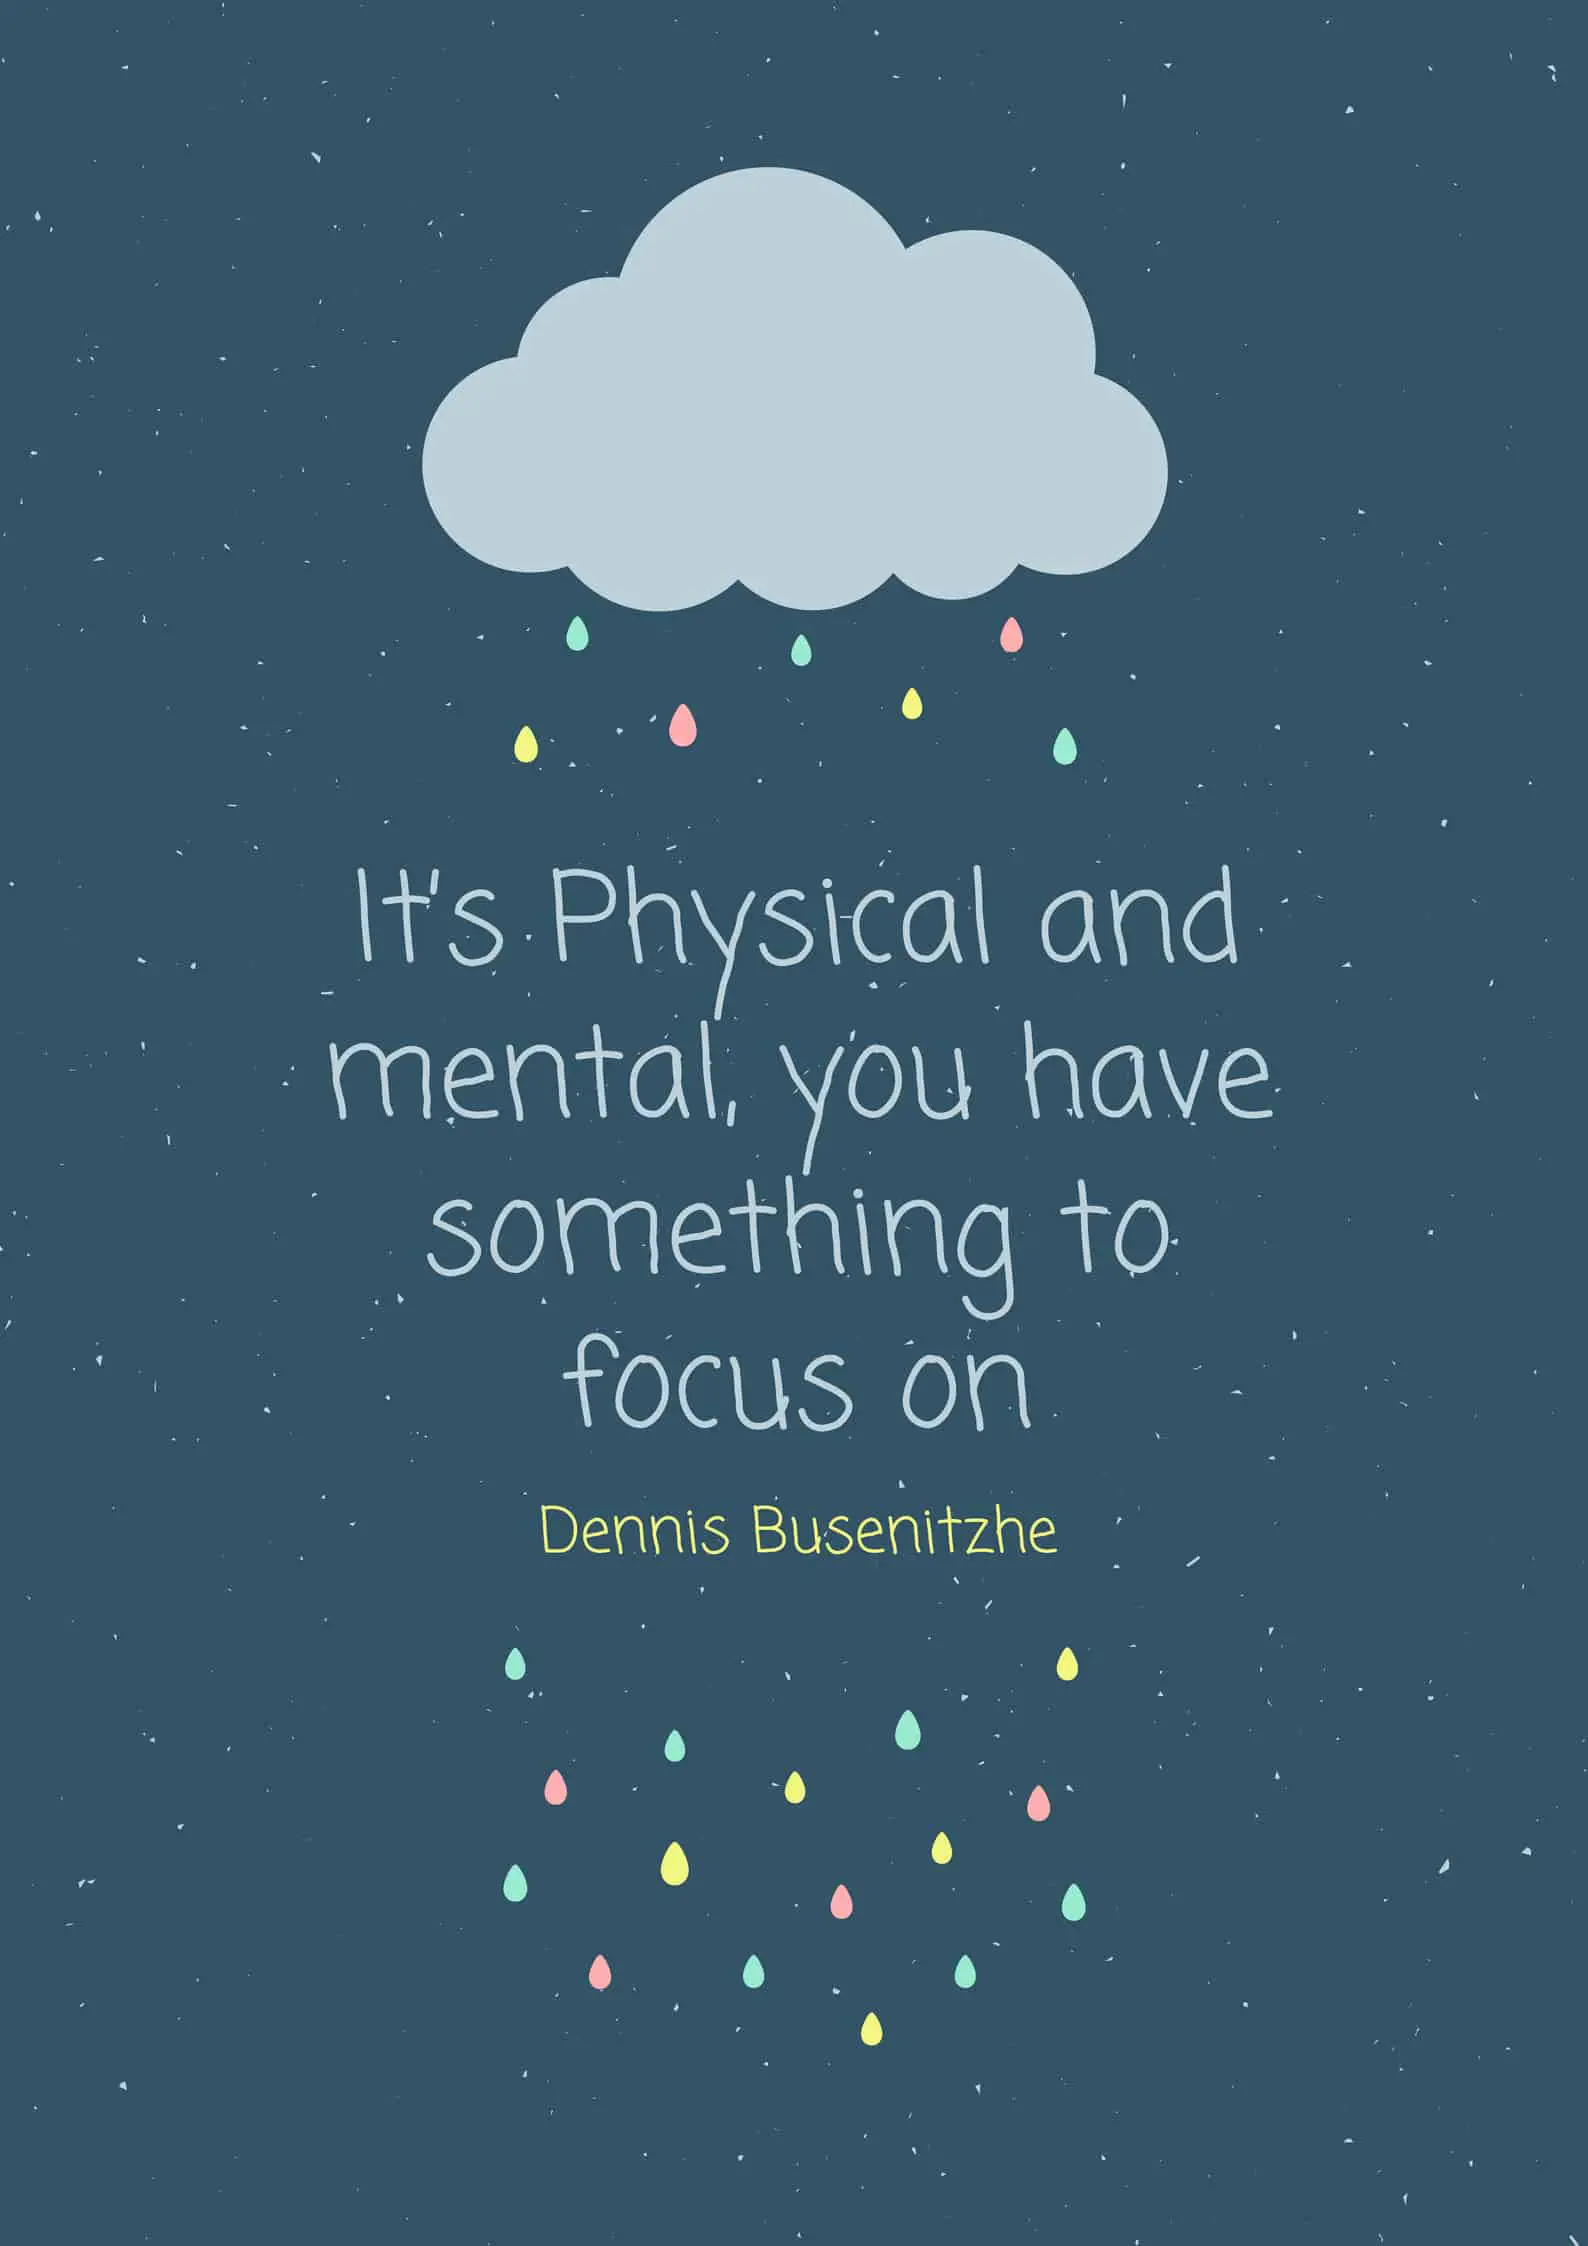 It’s Physical and mental, you have something to focus on